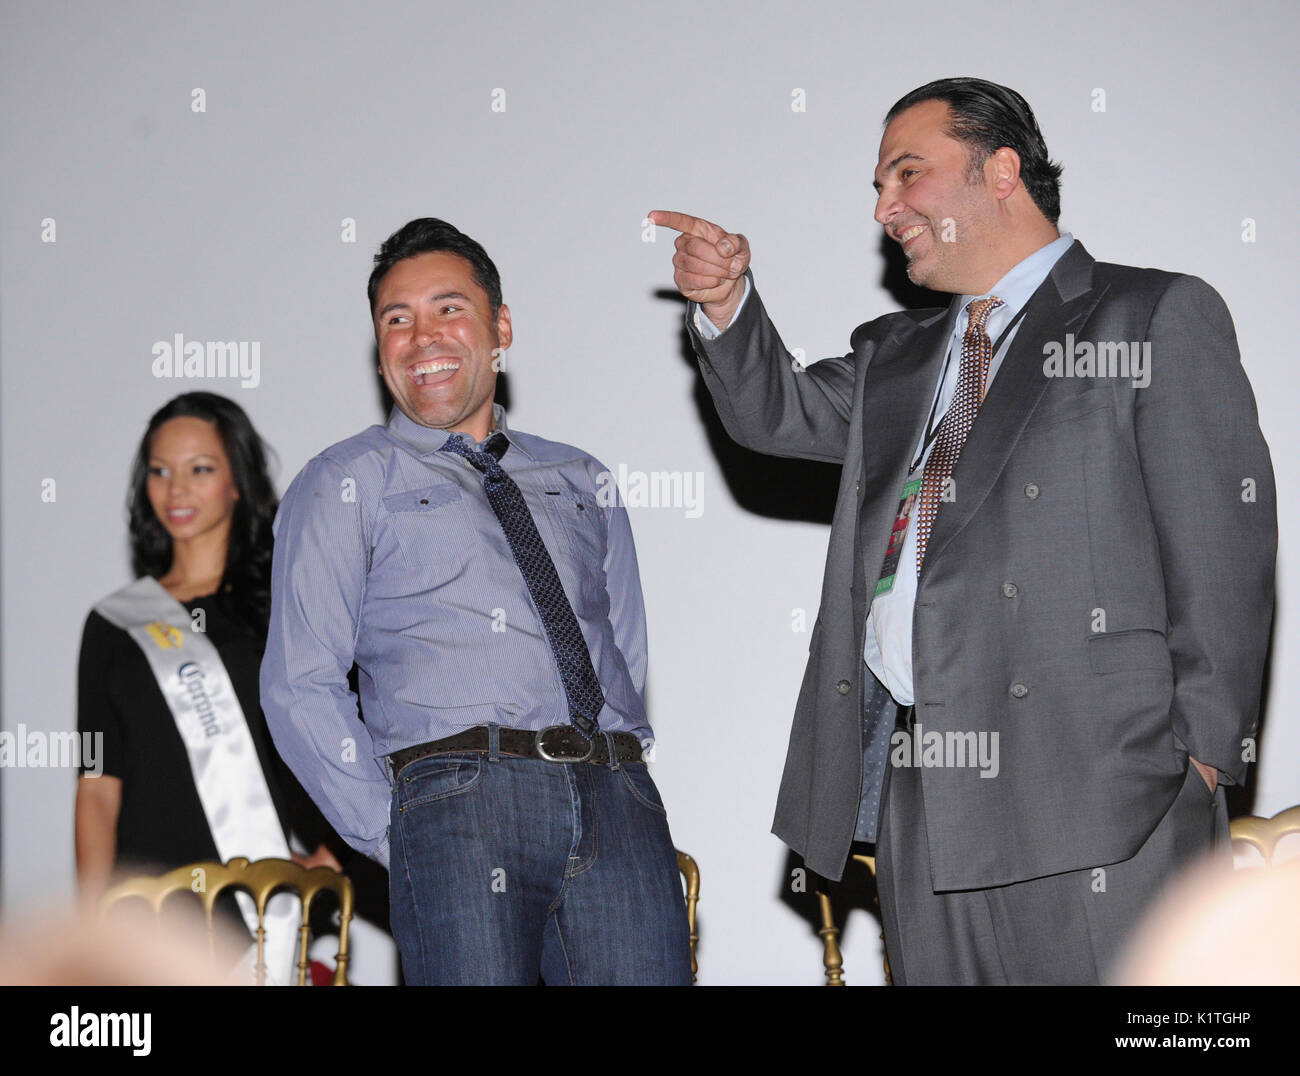 Oscar De La Hoya (c) attends press conference Grauman's Chinese Theatre Hollywood March 1,2012. Mayweather Cotto will meet WBA Super Welterweight World Championship fight May 5 MGM Grand Las Vegas. Stock Photo